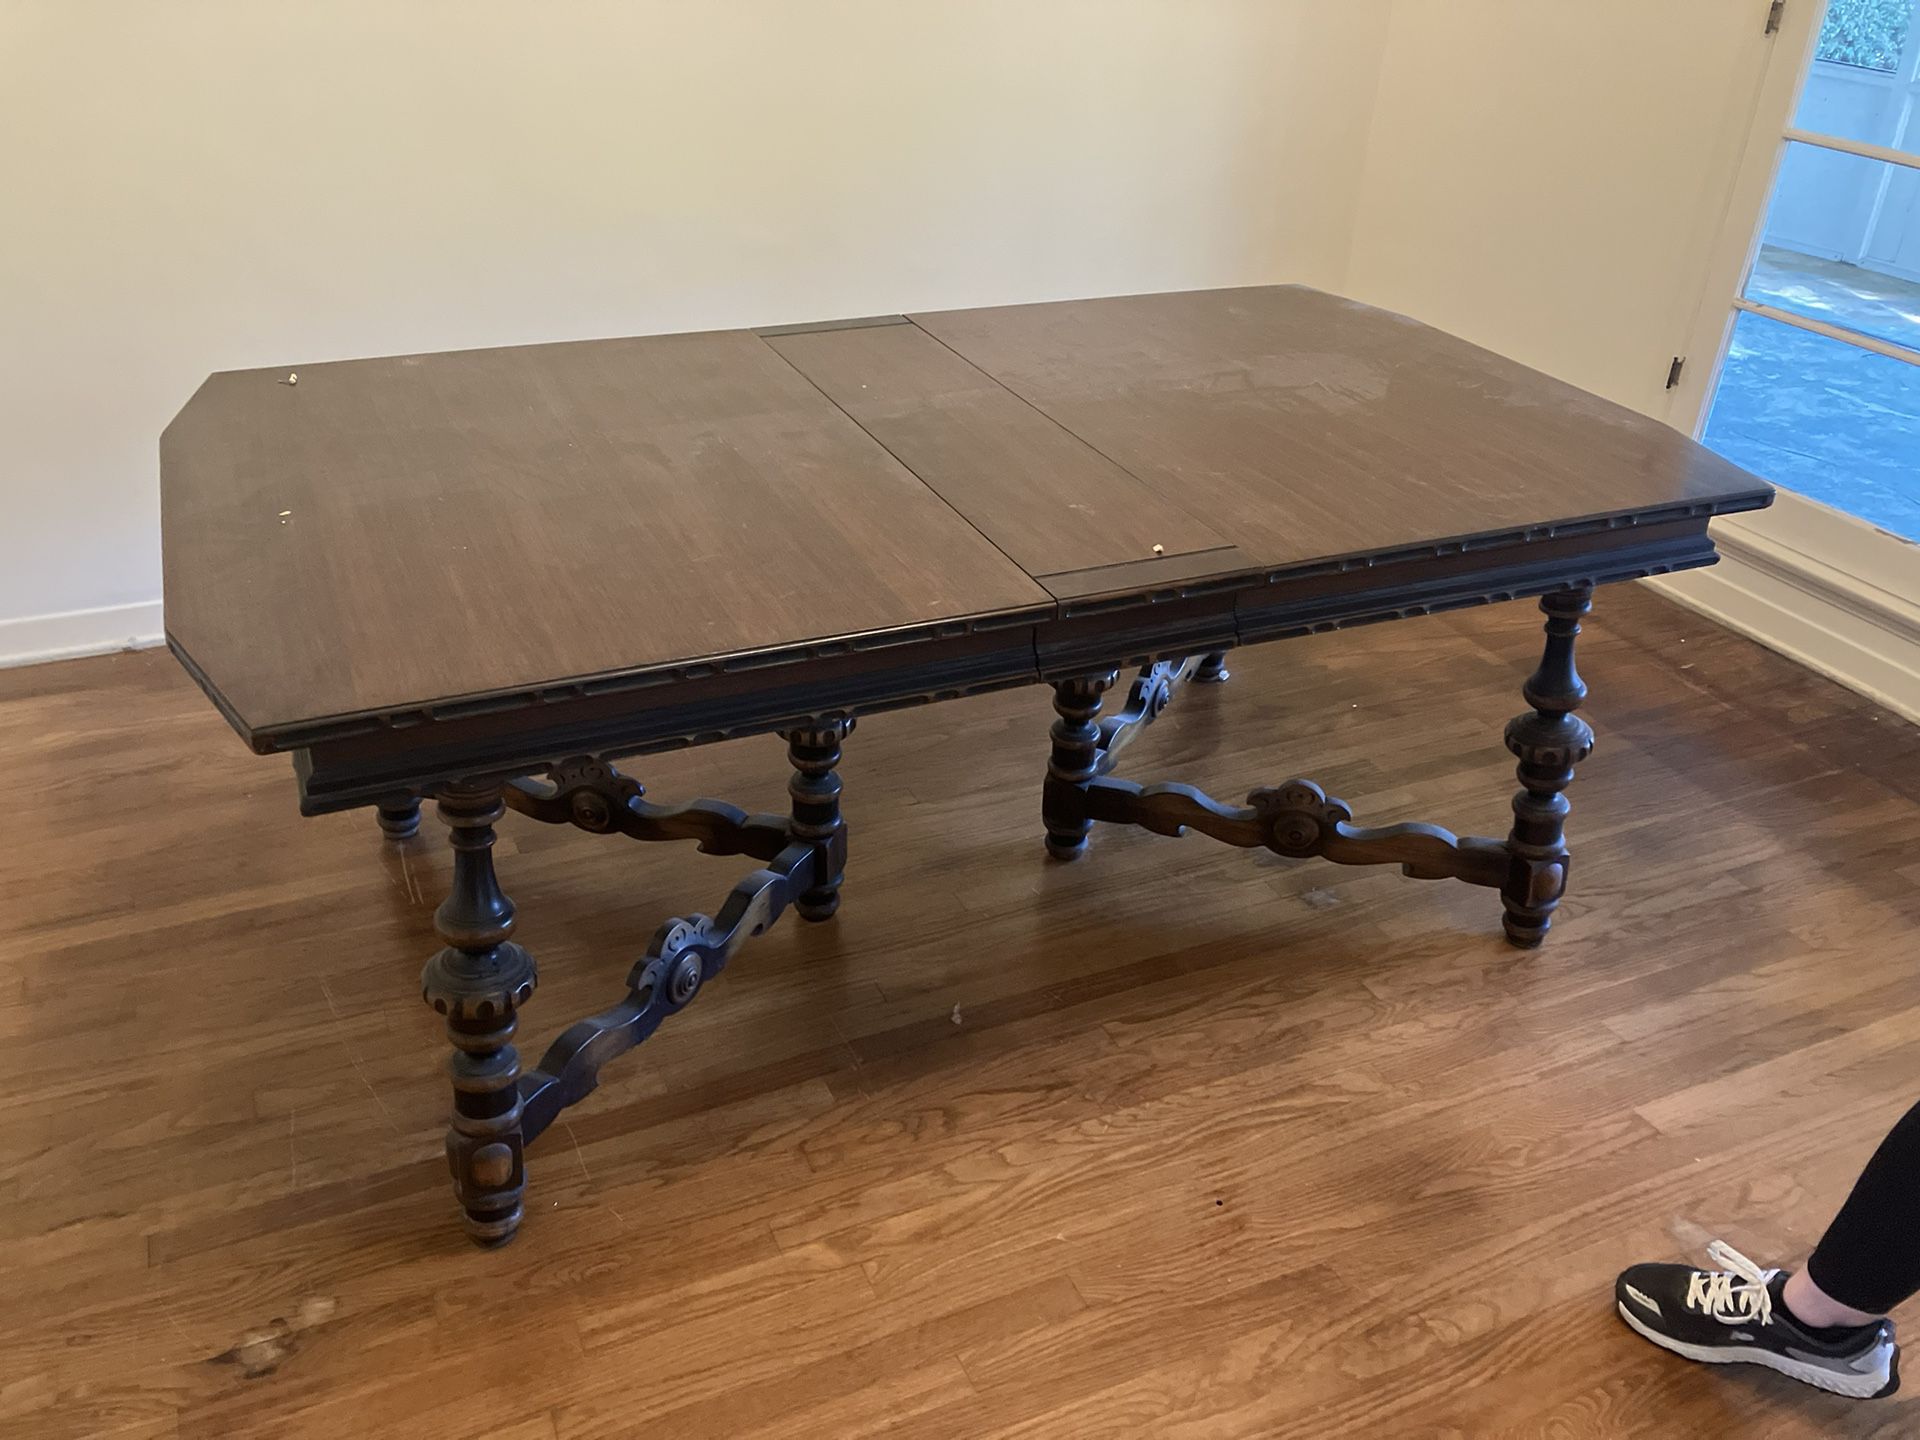 REAL Vintage Wood Table And Chairs